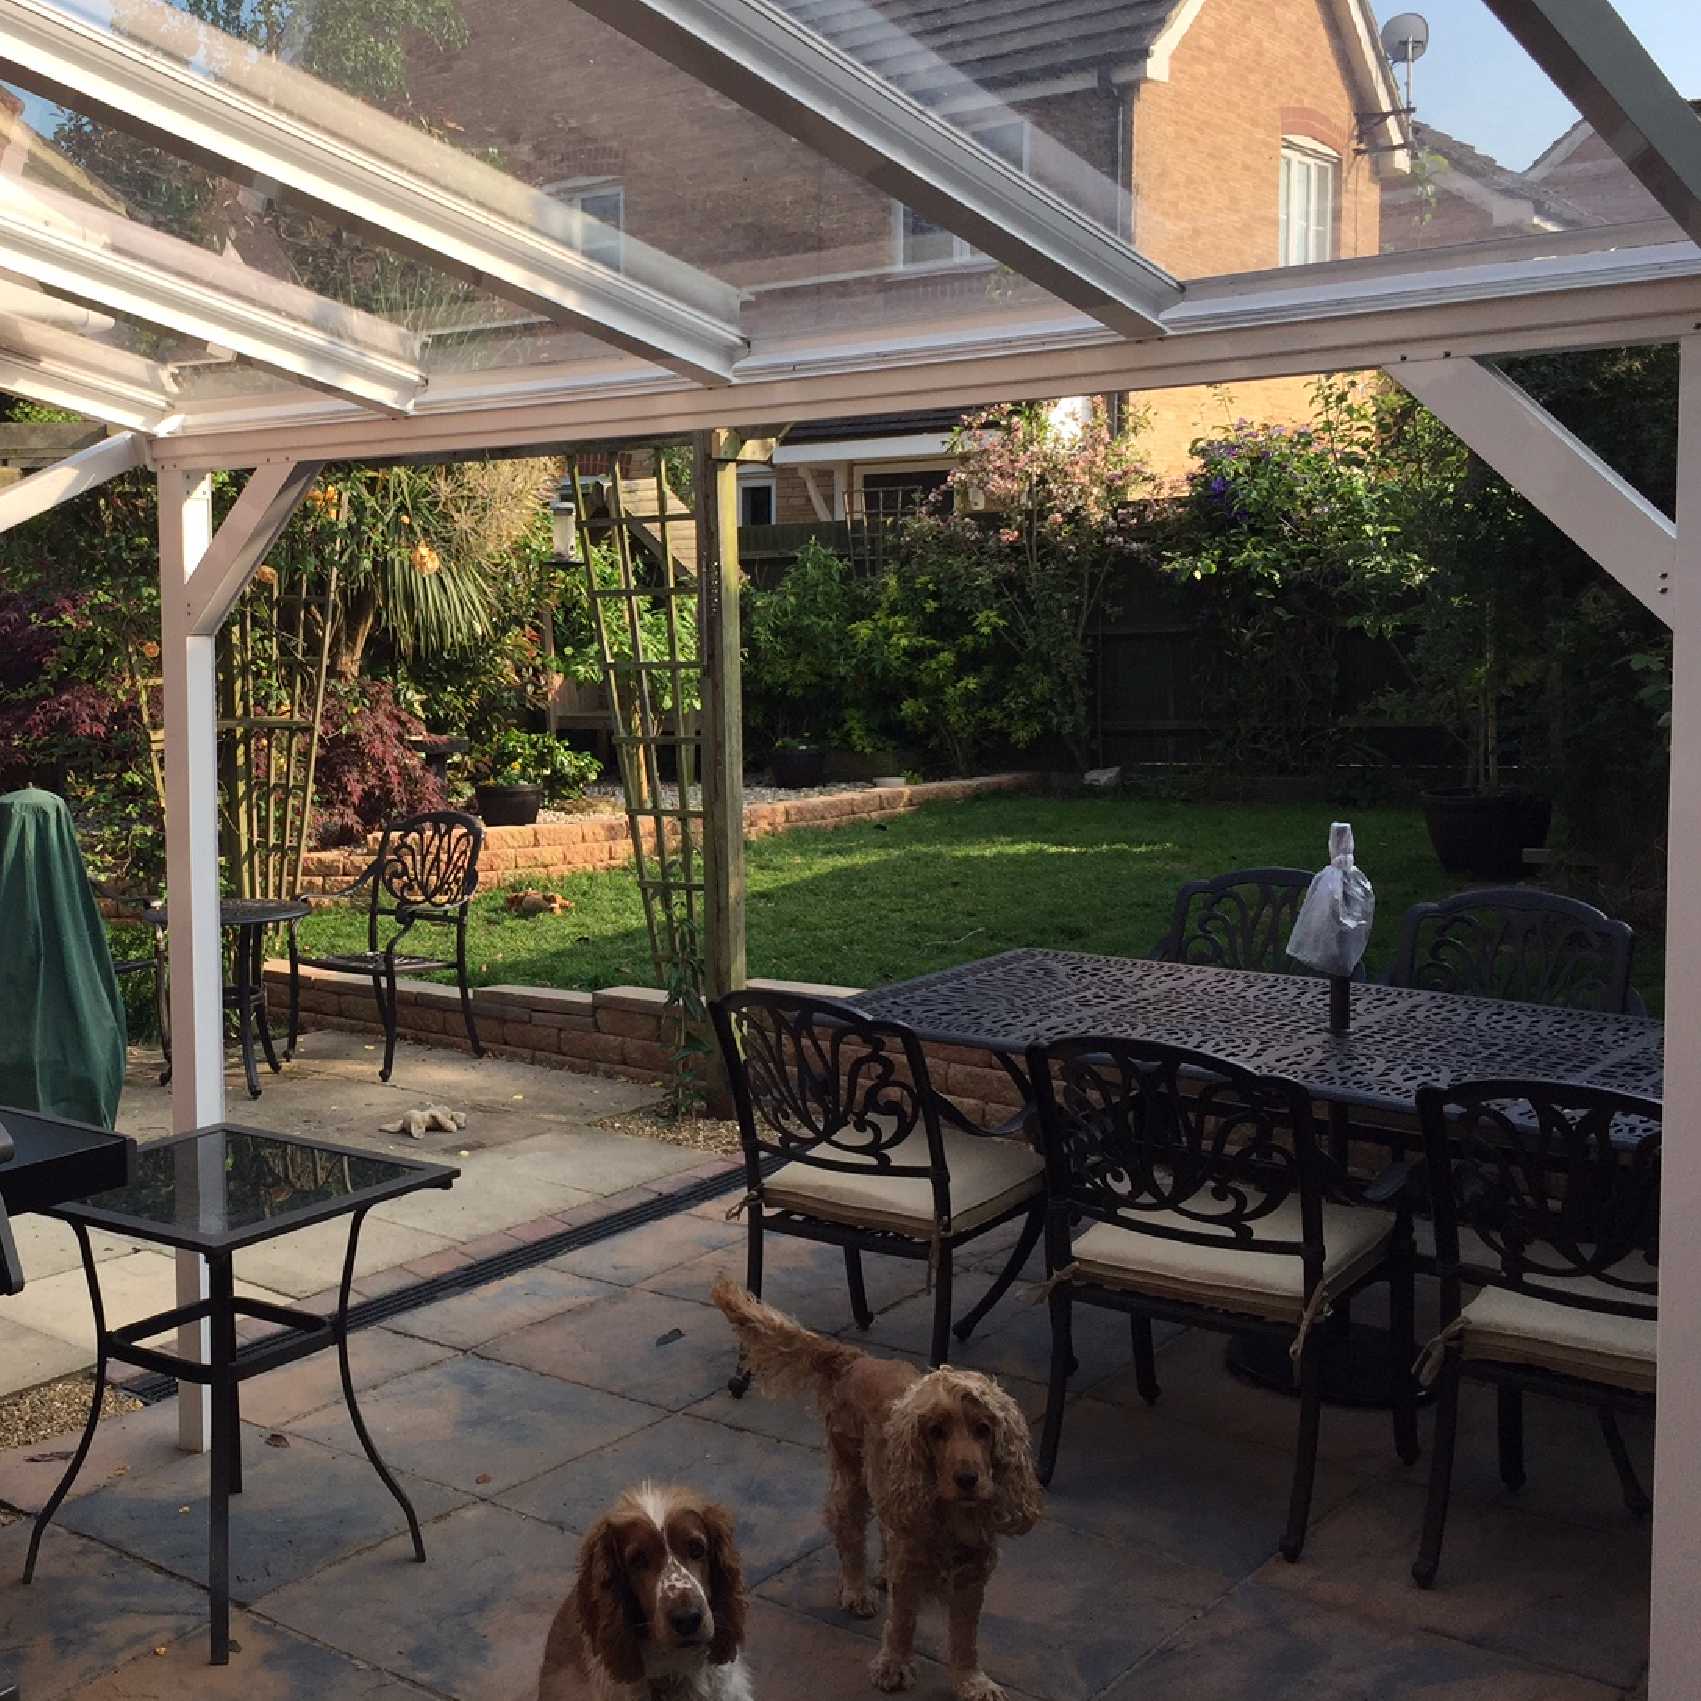 Affordable Omega Smart Lean-To Canopy, White UNGLAZED for 6mm Glazing - 5.6m (W) x 1.5m (P), (3) Supporting Posts